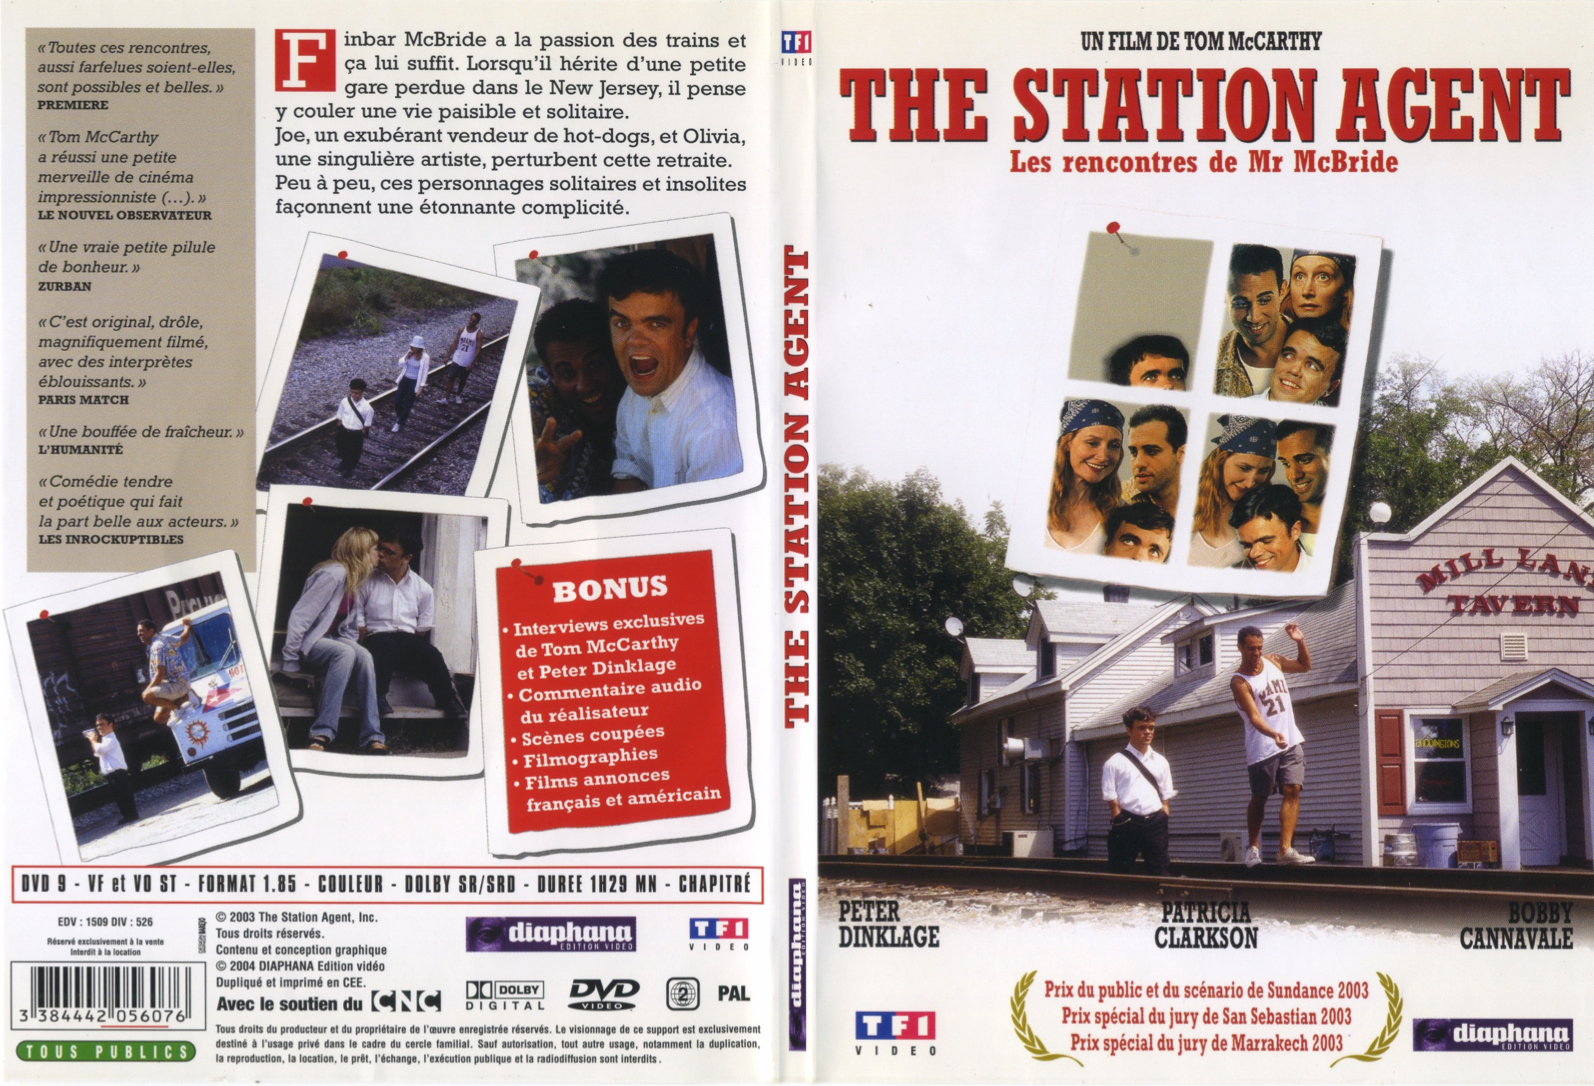 Jaquette DVD The Station Agent - SLIM